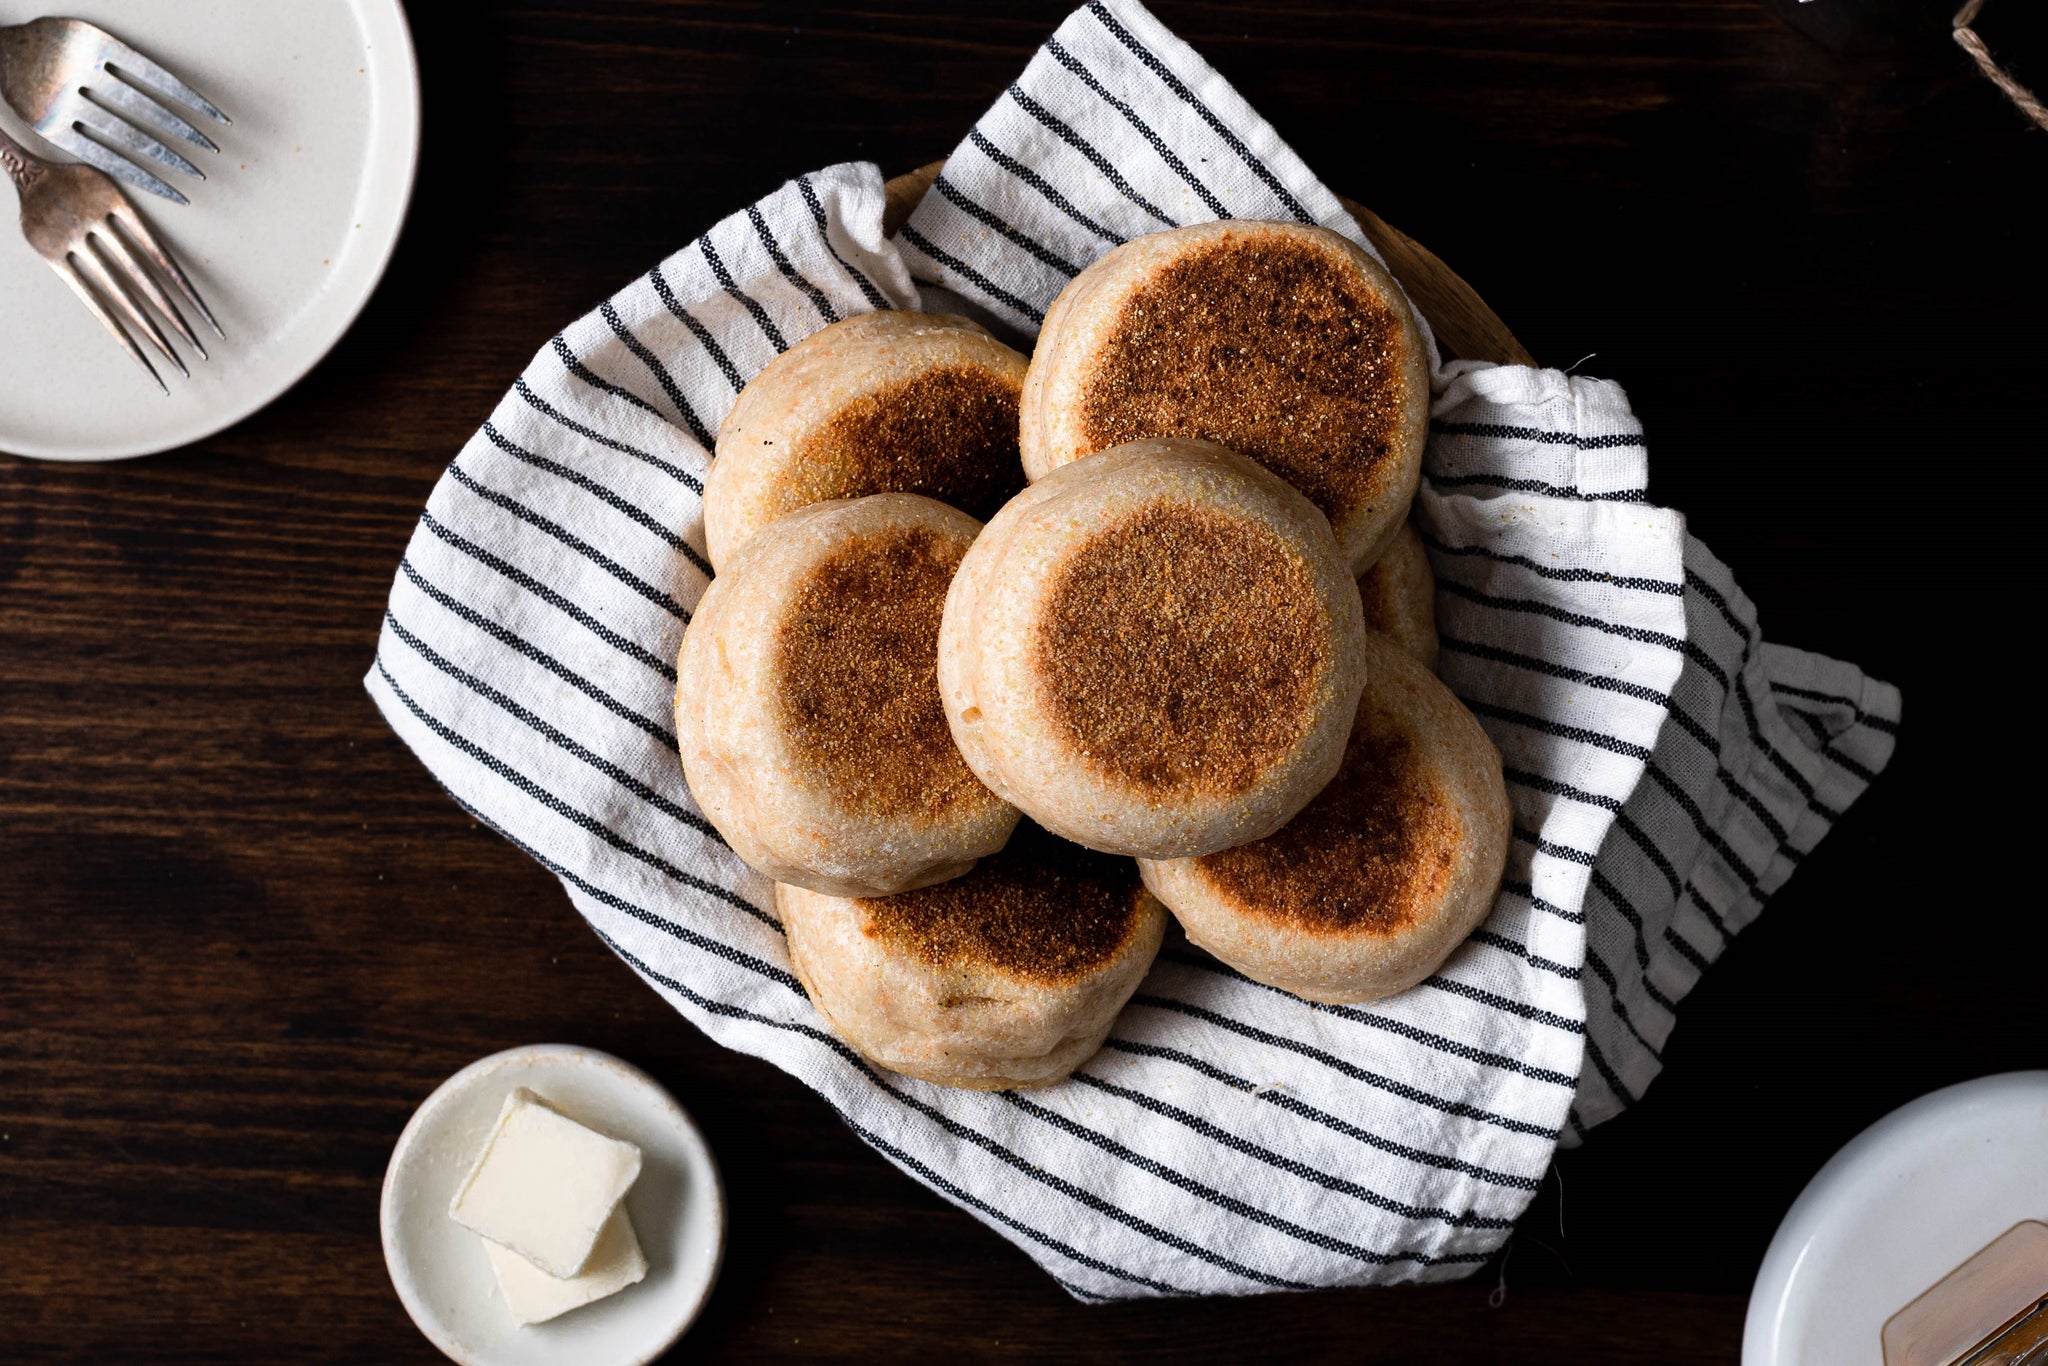 English muffins piled up on a striped kitchen town on a wooden table